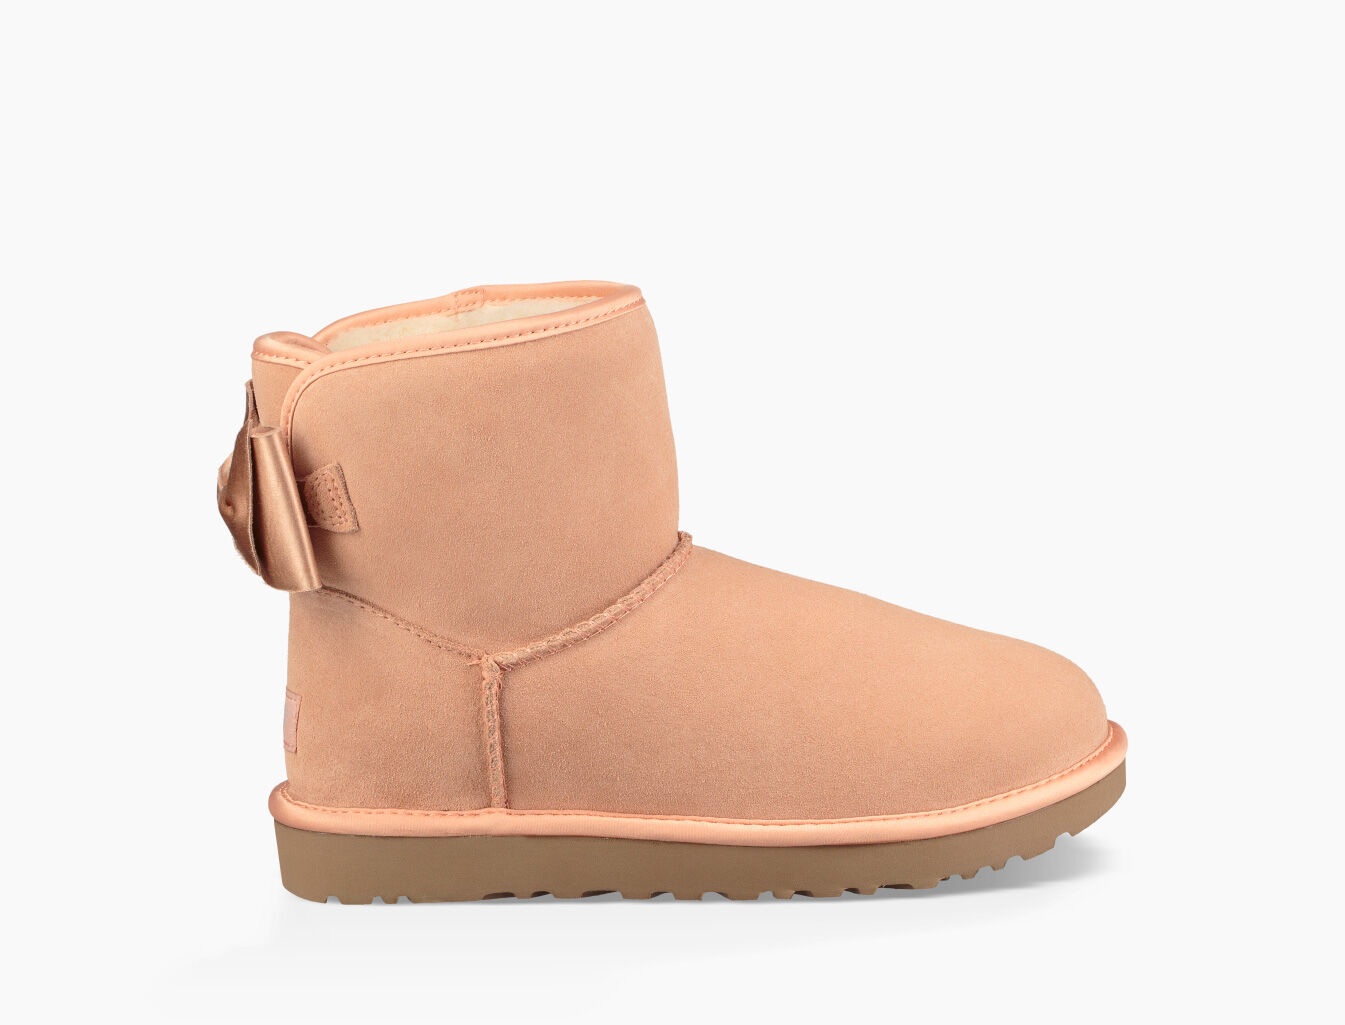 satin bow ugg boots